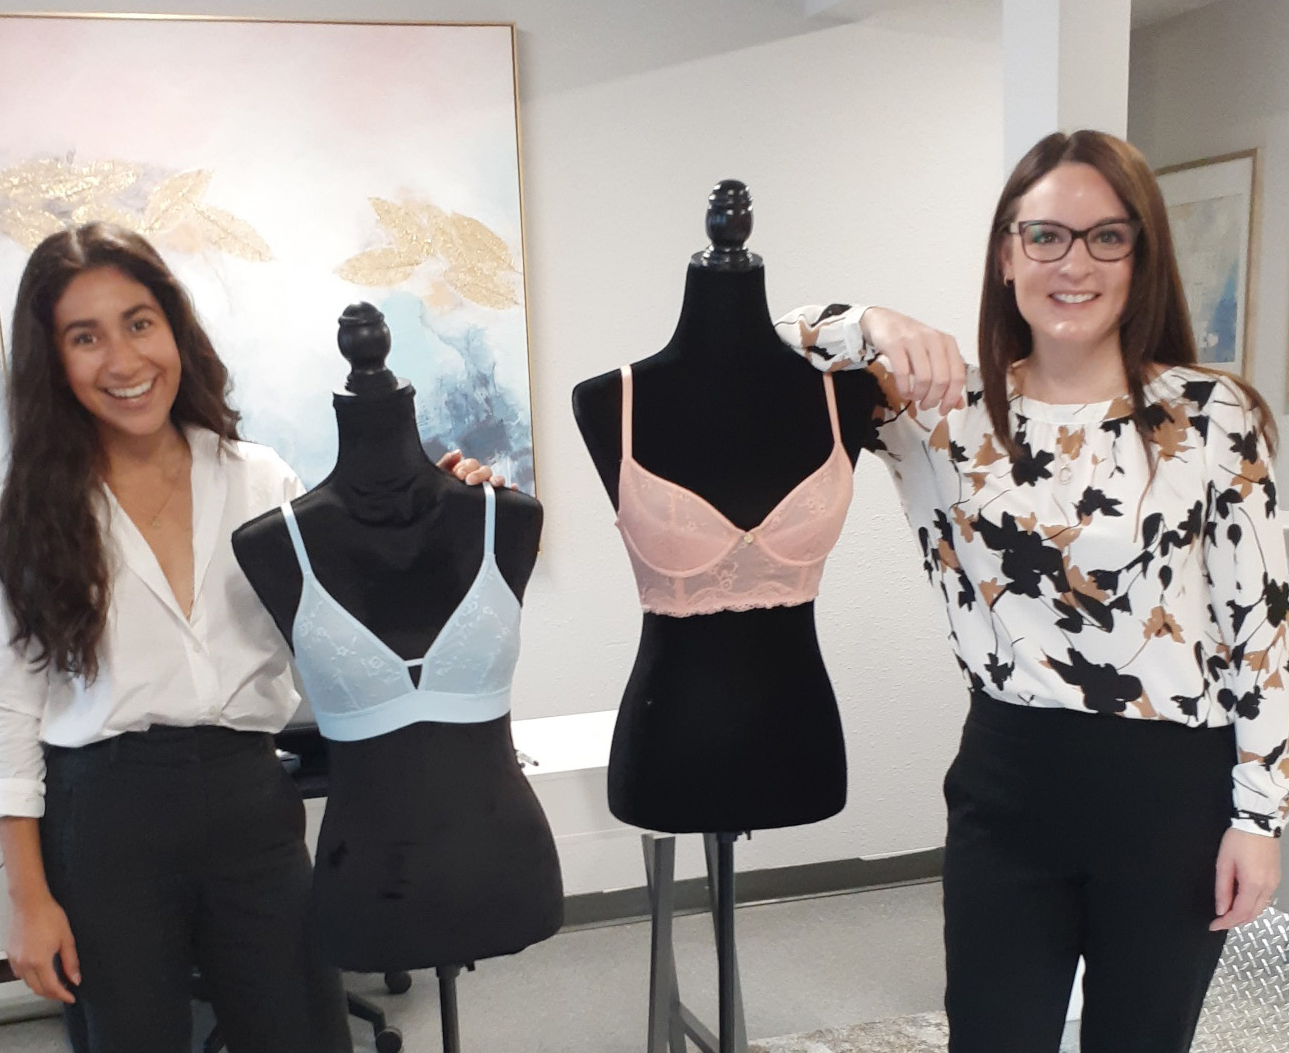 Prince George business collecting bras for women in need - Prince